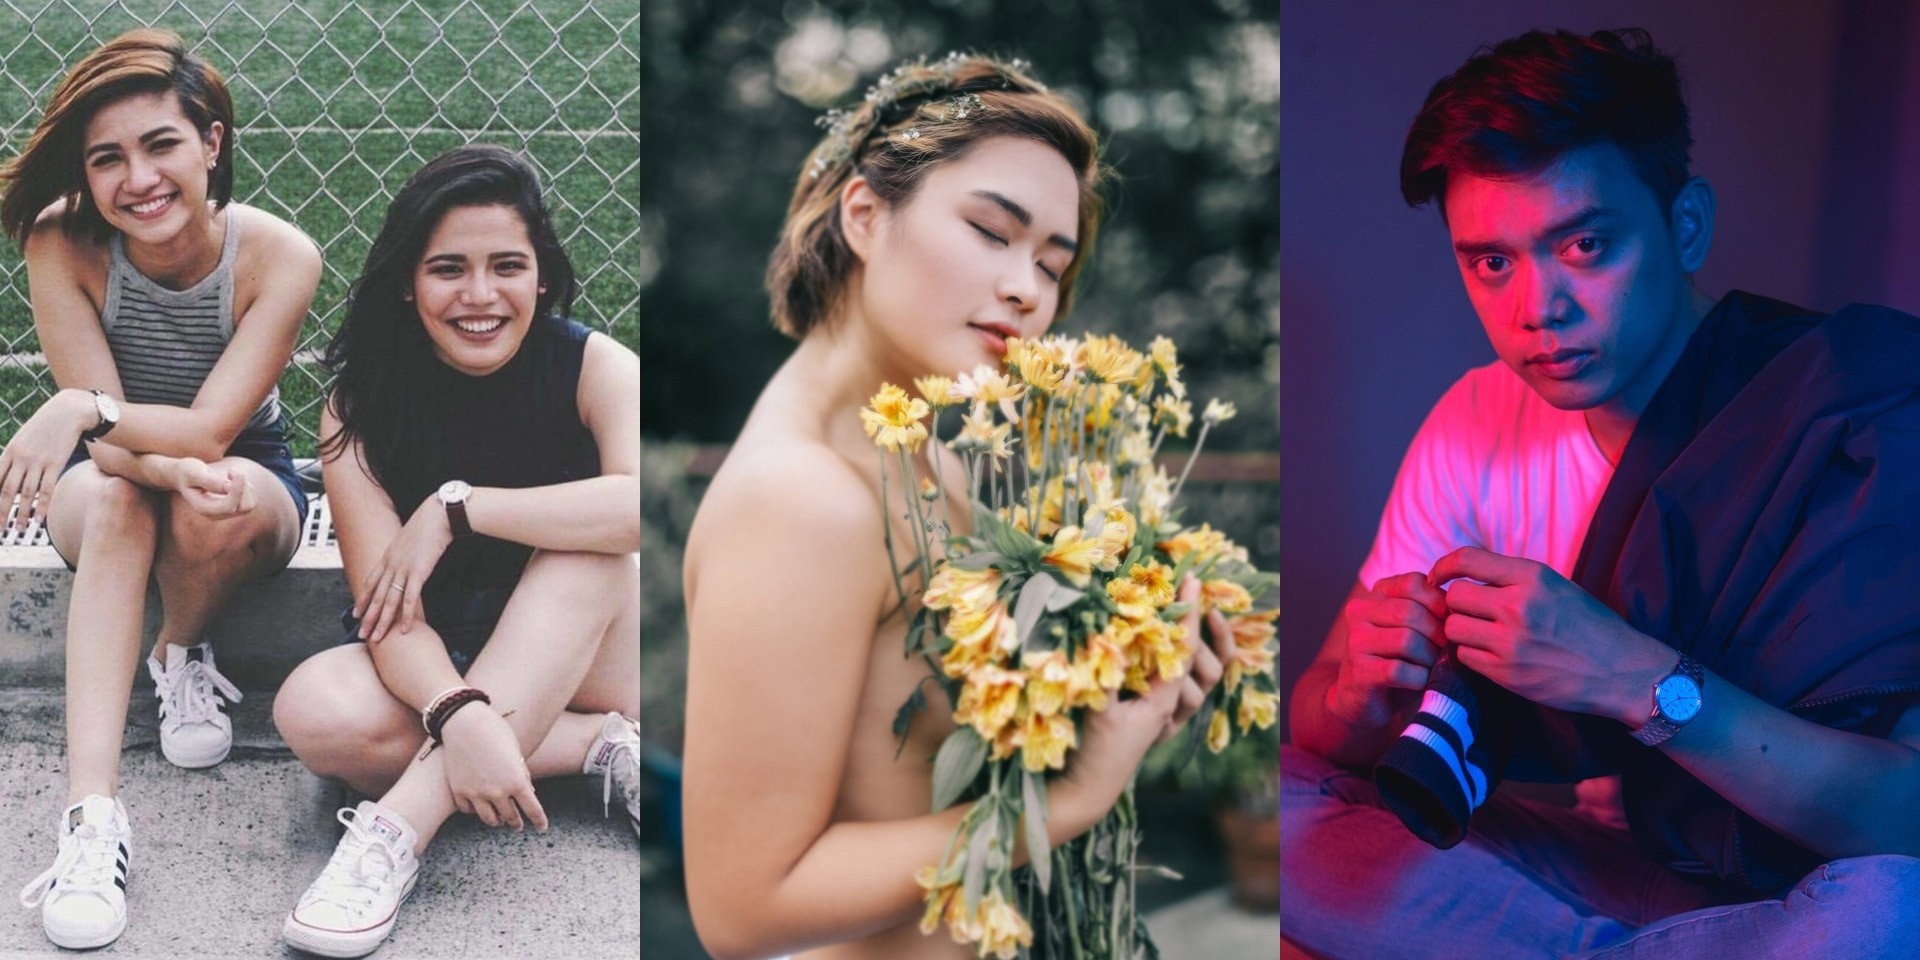 Leanne & Naara, Rice Lucido, Juan Miguel Severo, and more release new music – listen